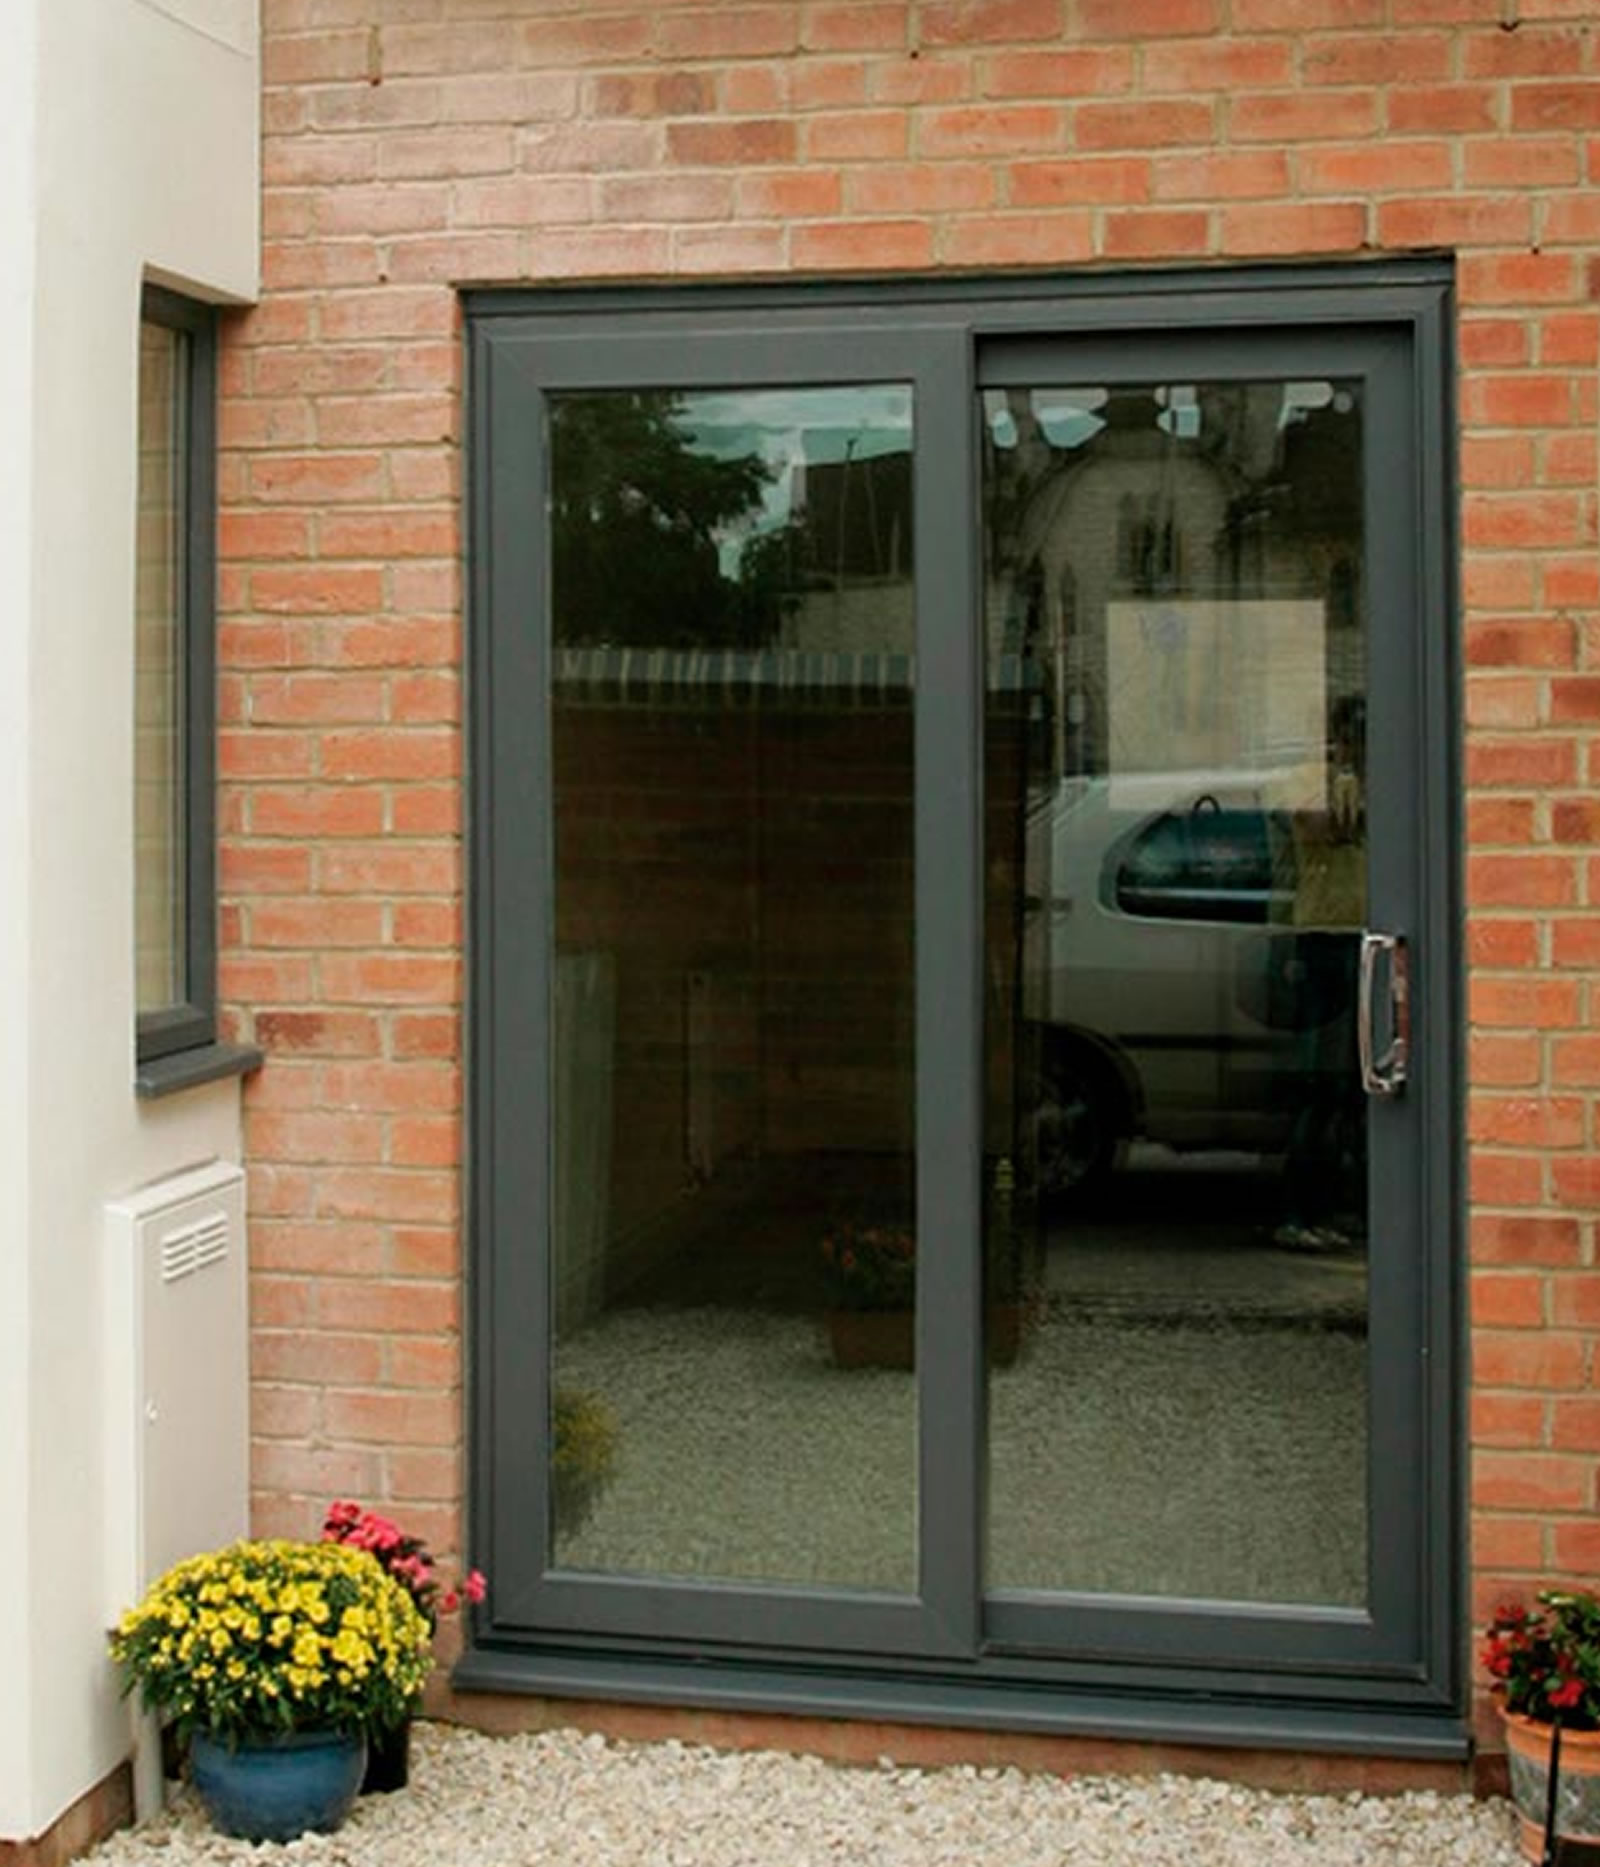 evawhite windows manufacture and install double glazed UPVC doors